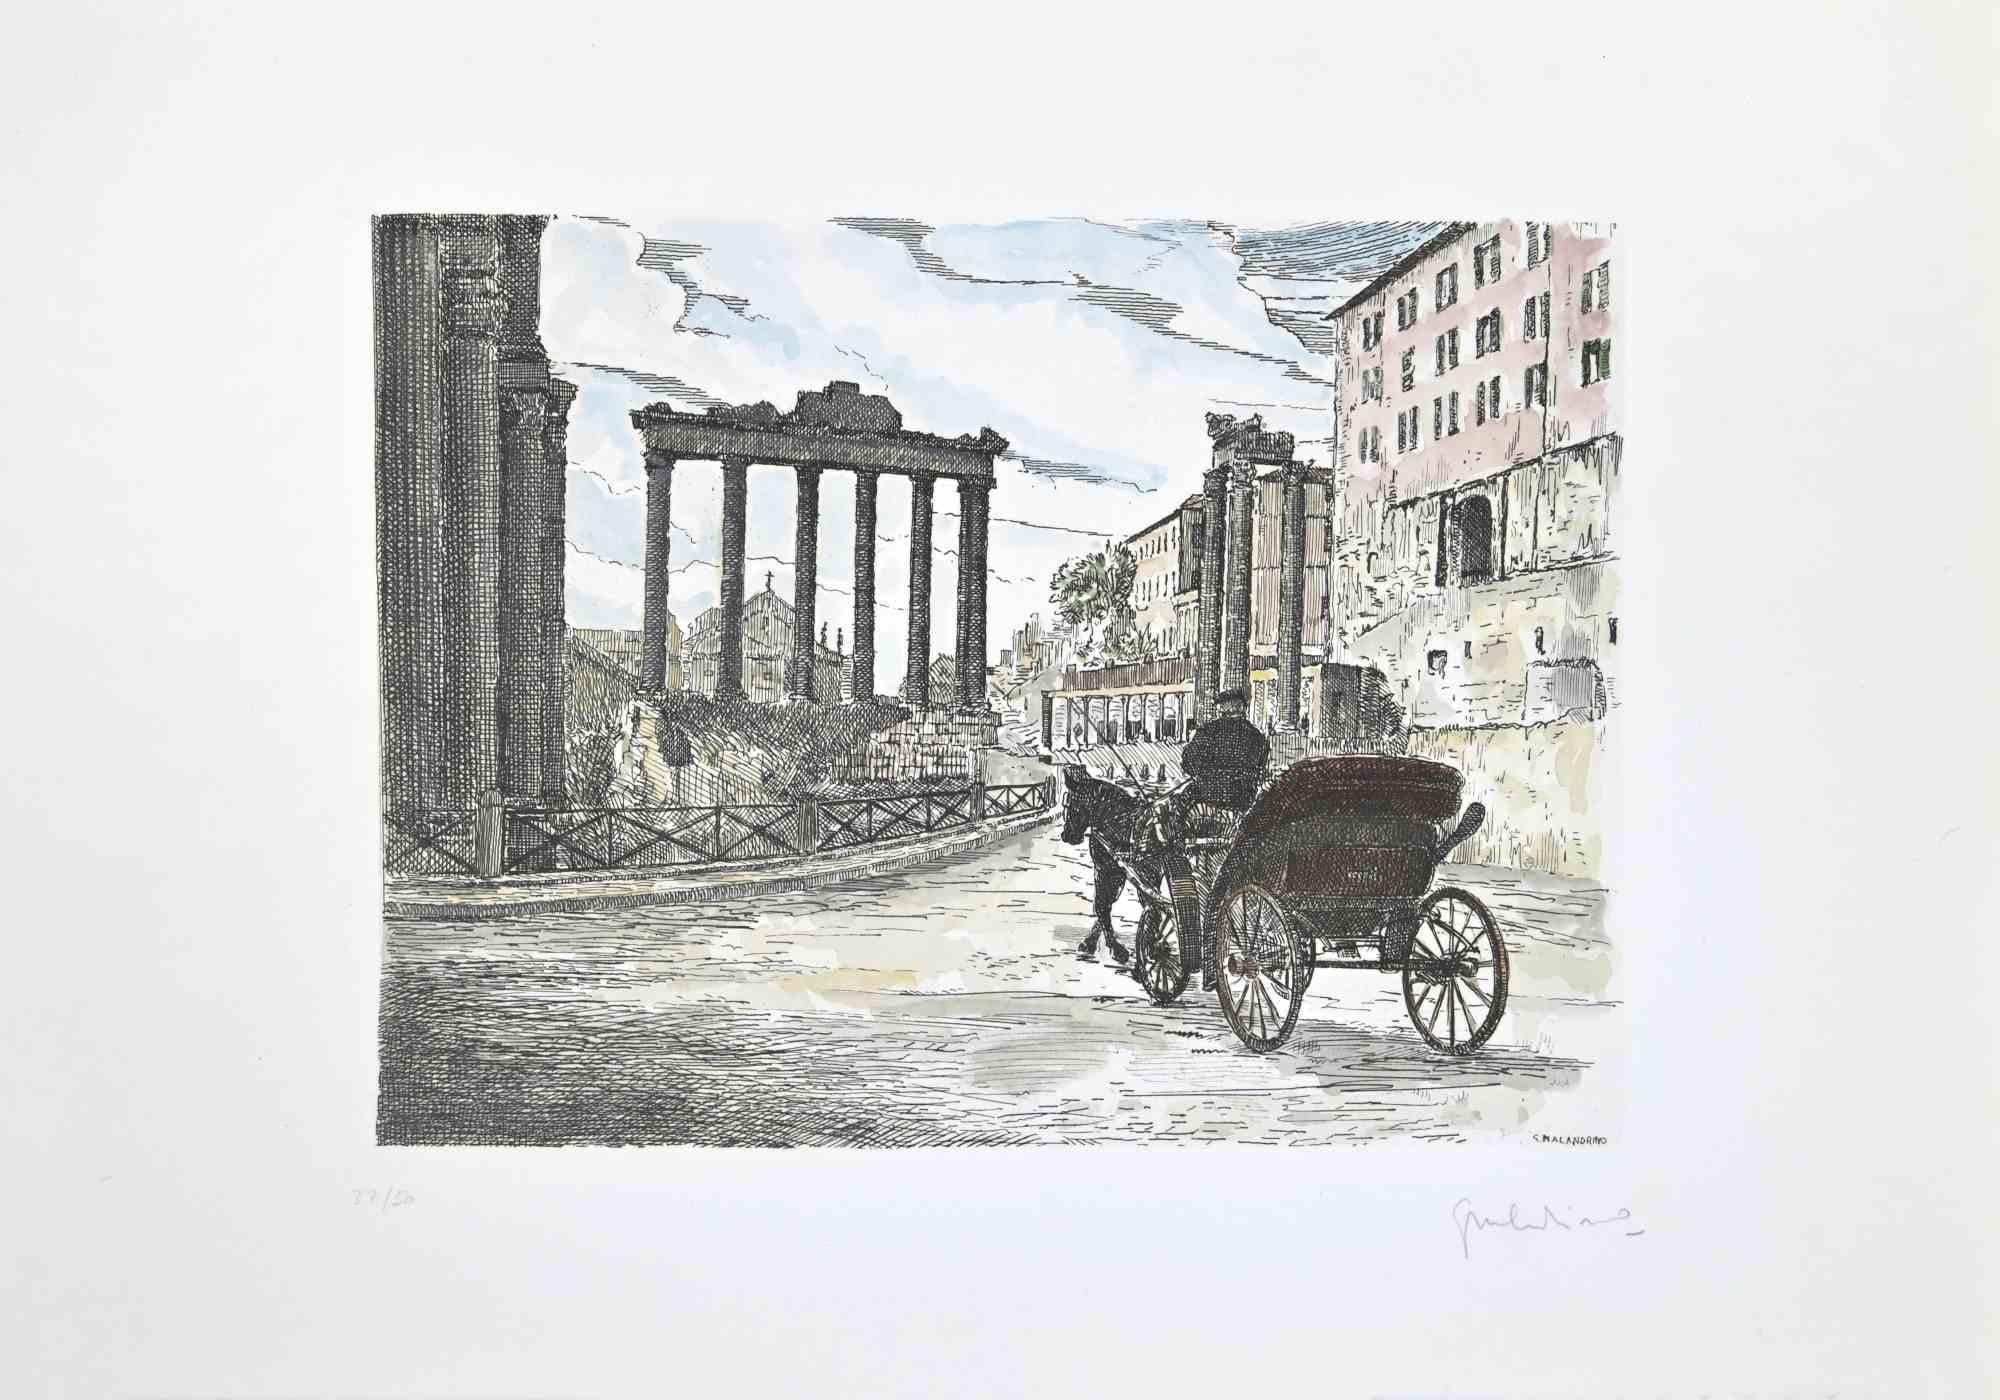 Roman Forum is an artwork realized by Giuseppe Malandrino.

Print in etching technique and hand watercolored.

Hand-signed by the artist in pencil on the lower right corner.

Numbered edition,37/50.

Good condition.

This artwork represents the